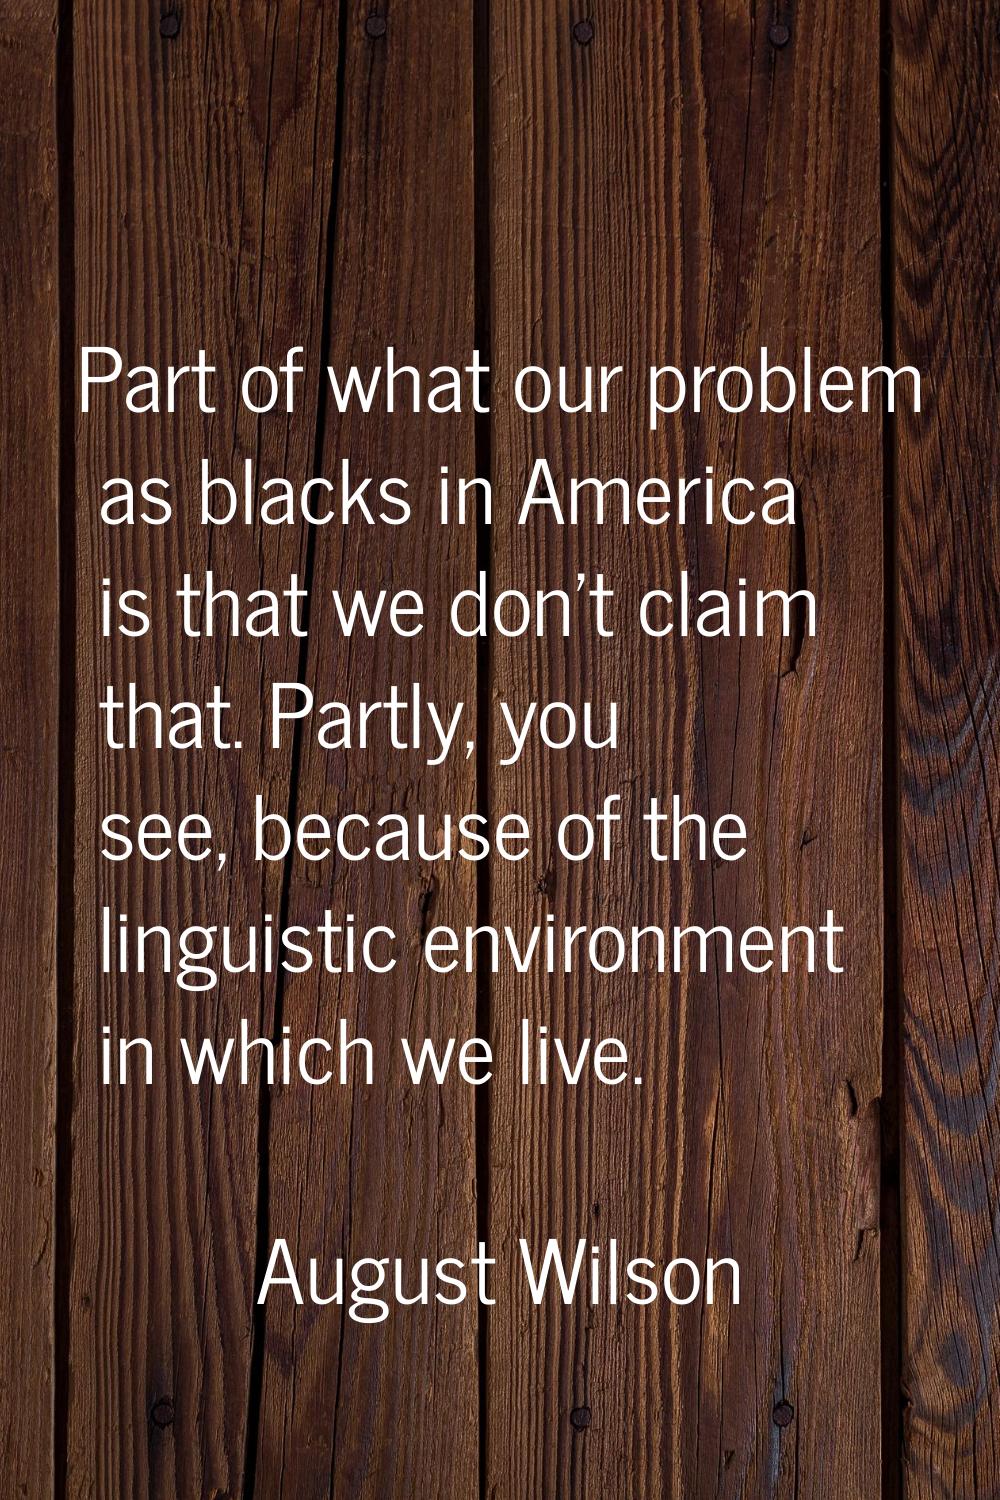 Part of what our problem as blacks in America is that we don't claim that. Partly, you see, because